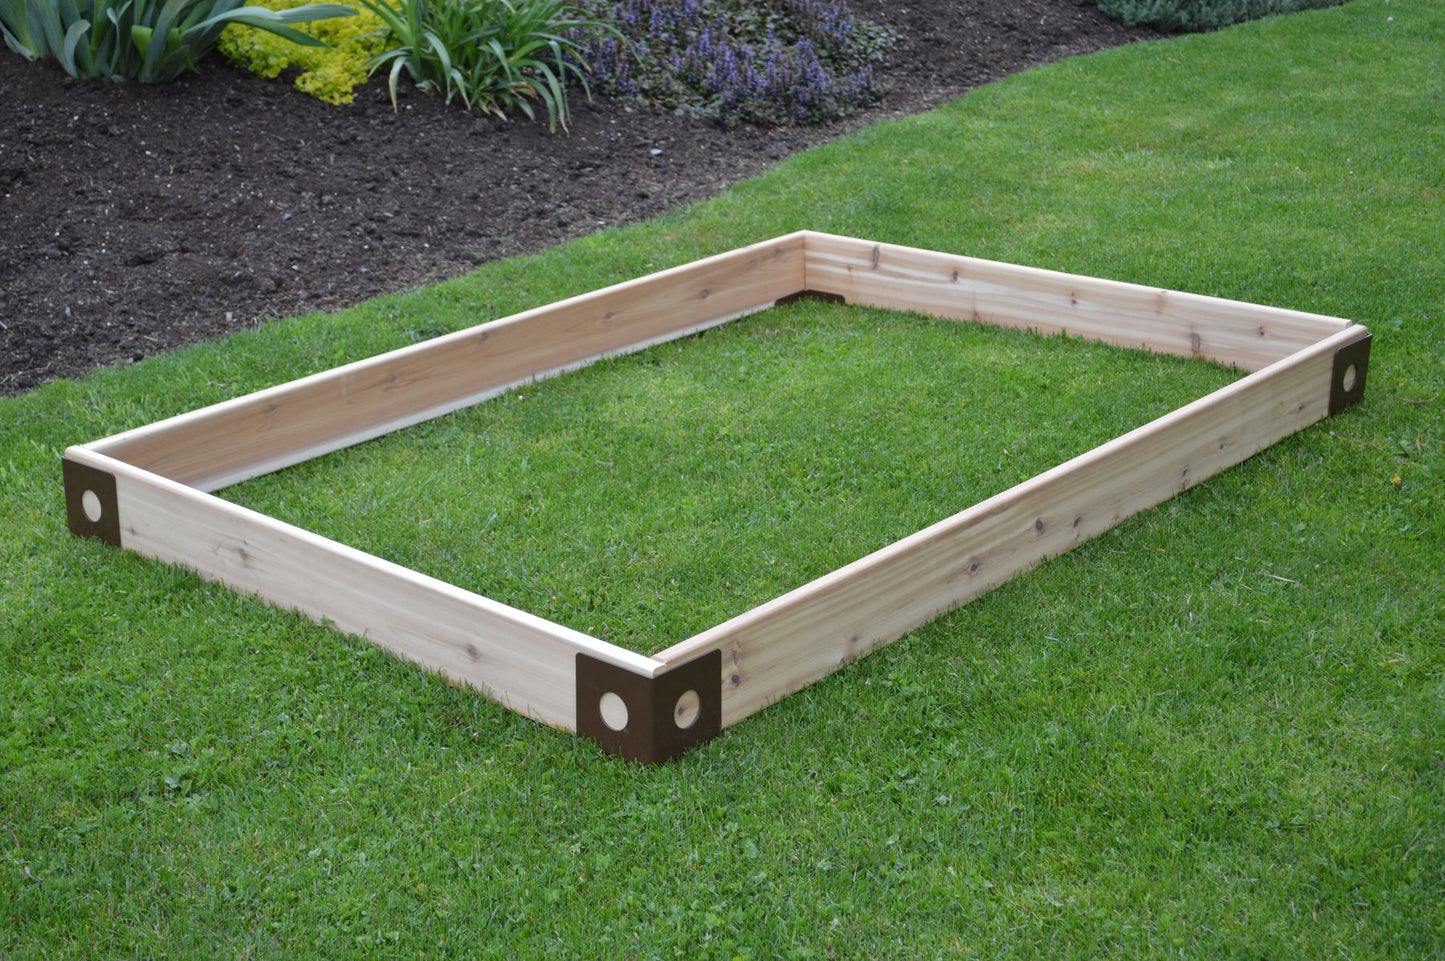 A&L Furniture Co. Western Red Cedar Raised Garden Bed with Decorative Corners - LEAD TIME TO SHIP 4 WEEKS OR LESS